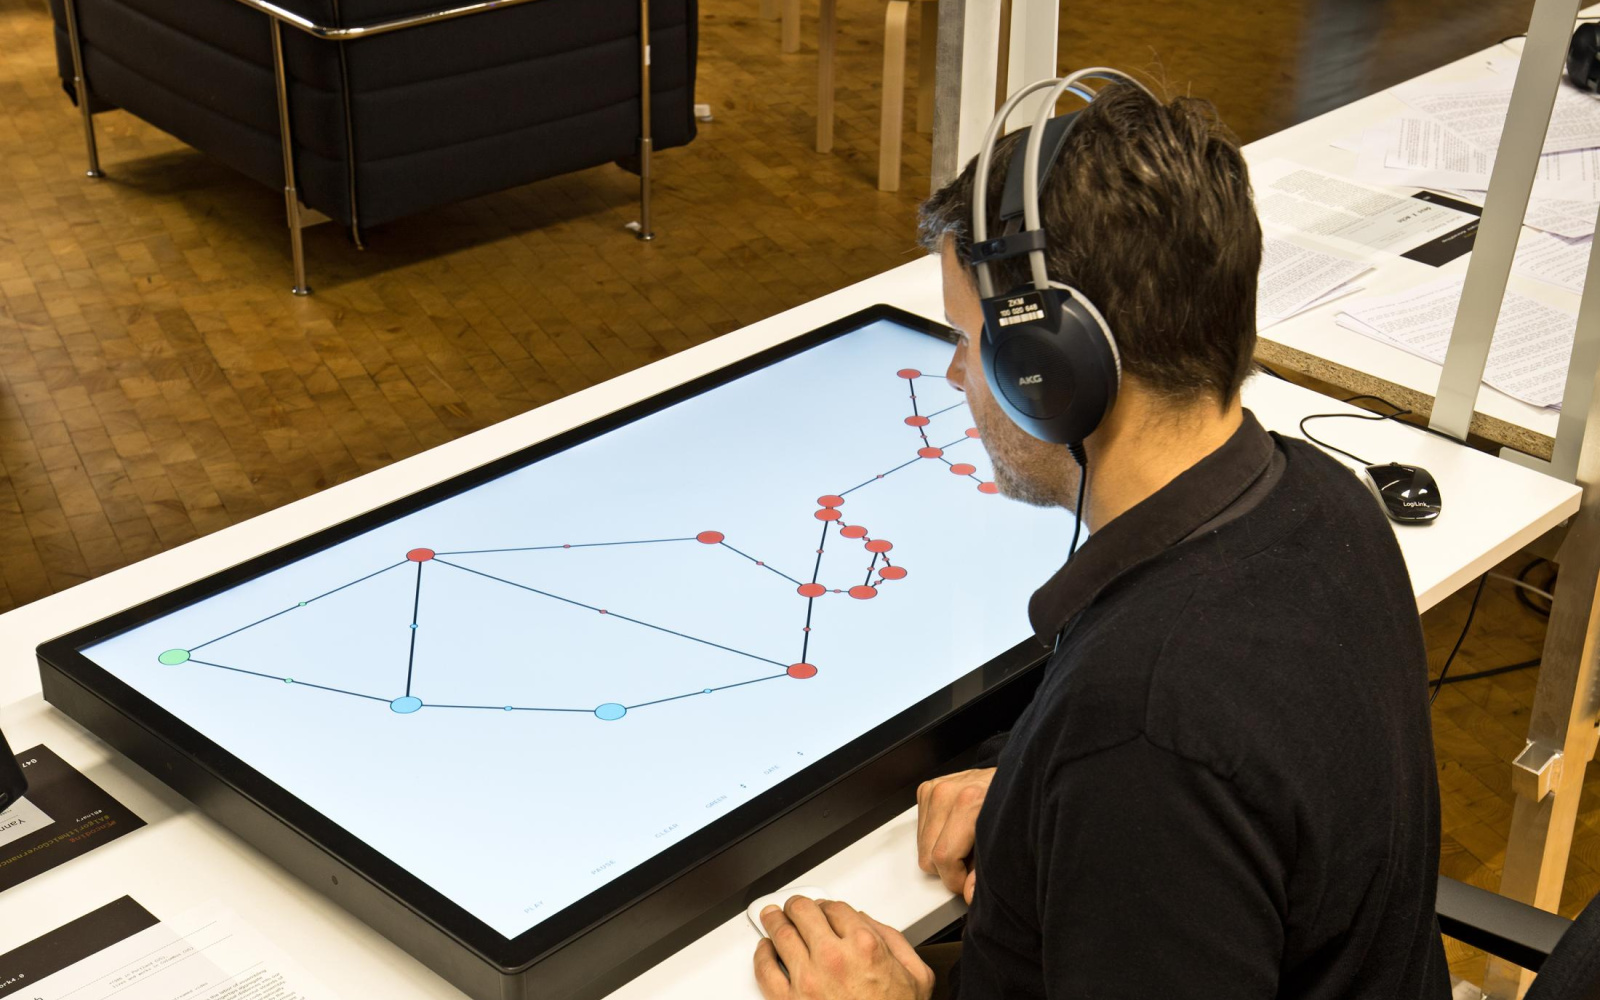 A man has headphones on and sits in front of a large screen lying on the table, which shows a graphic structure